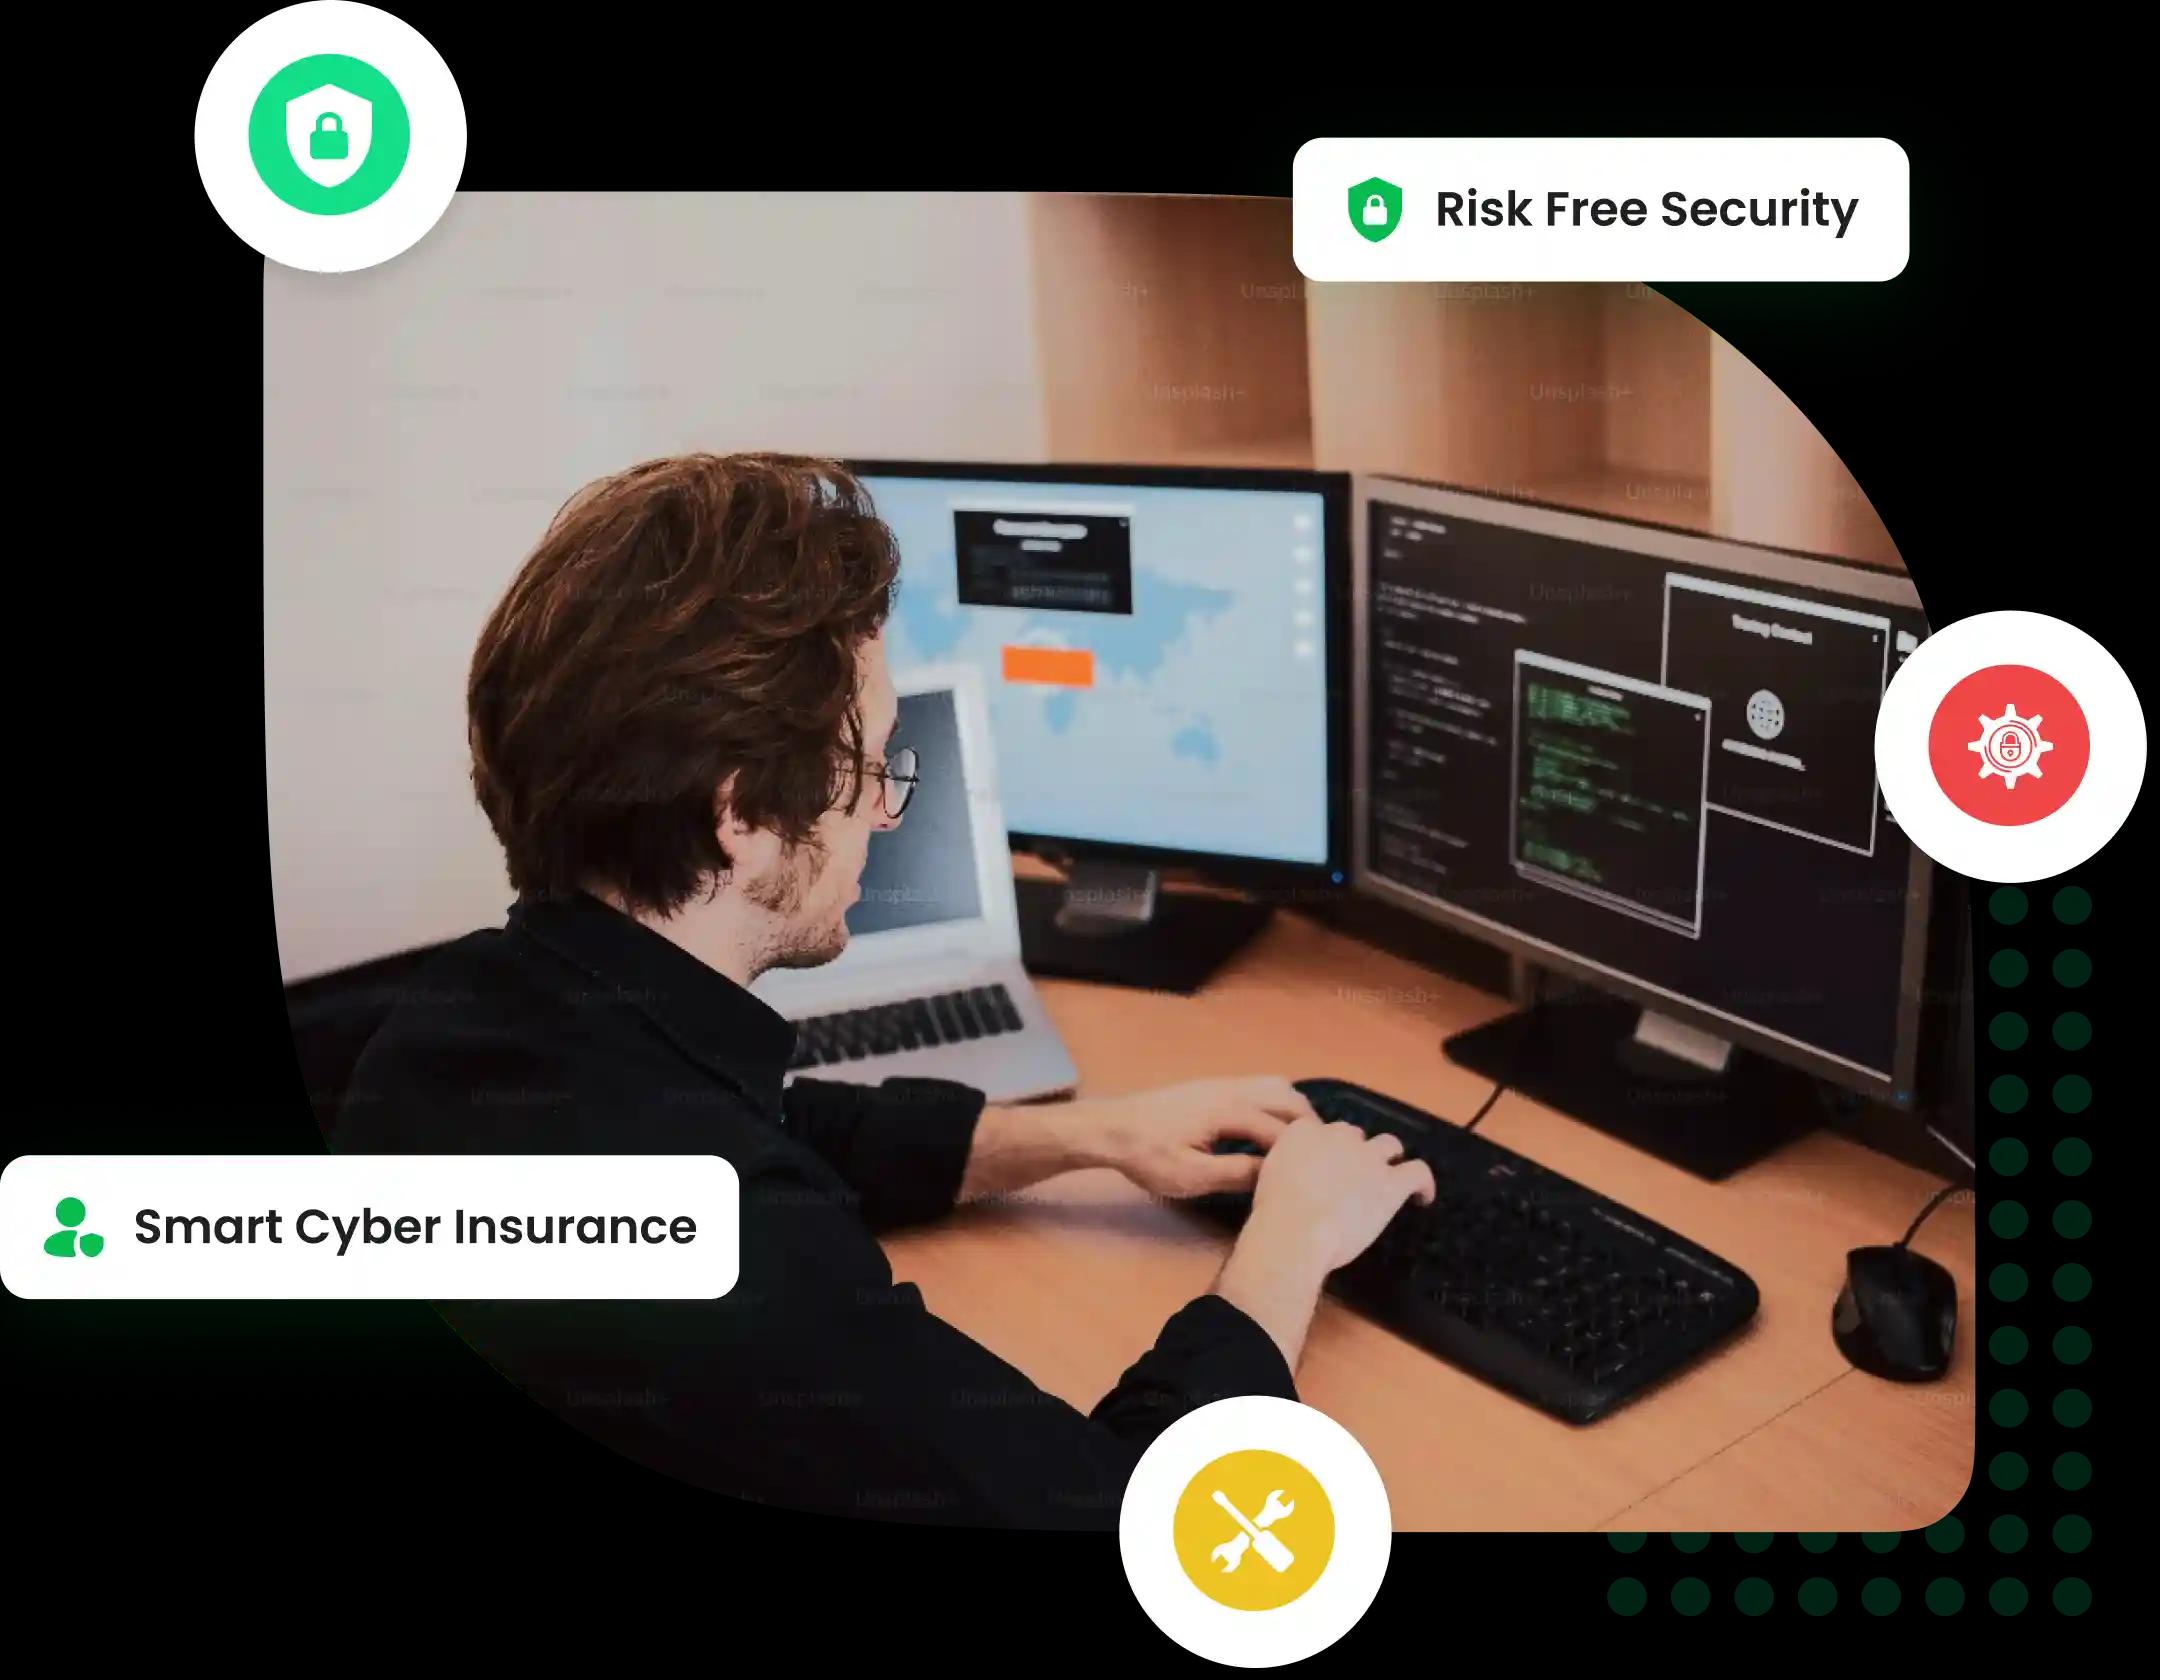 Professional at a workstation with multiple screens, signifying Mitigata’s focus on comprehensive cyber insurance solutions.